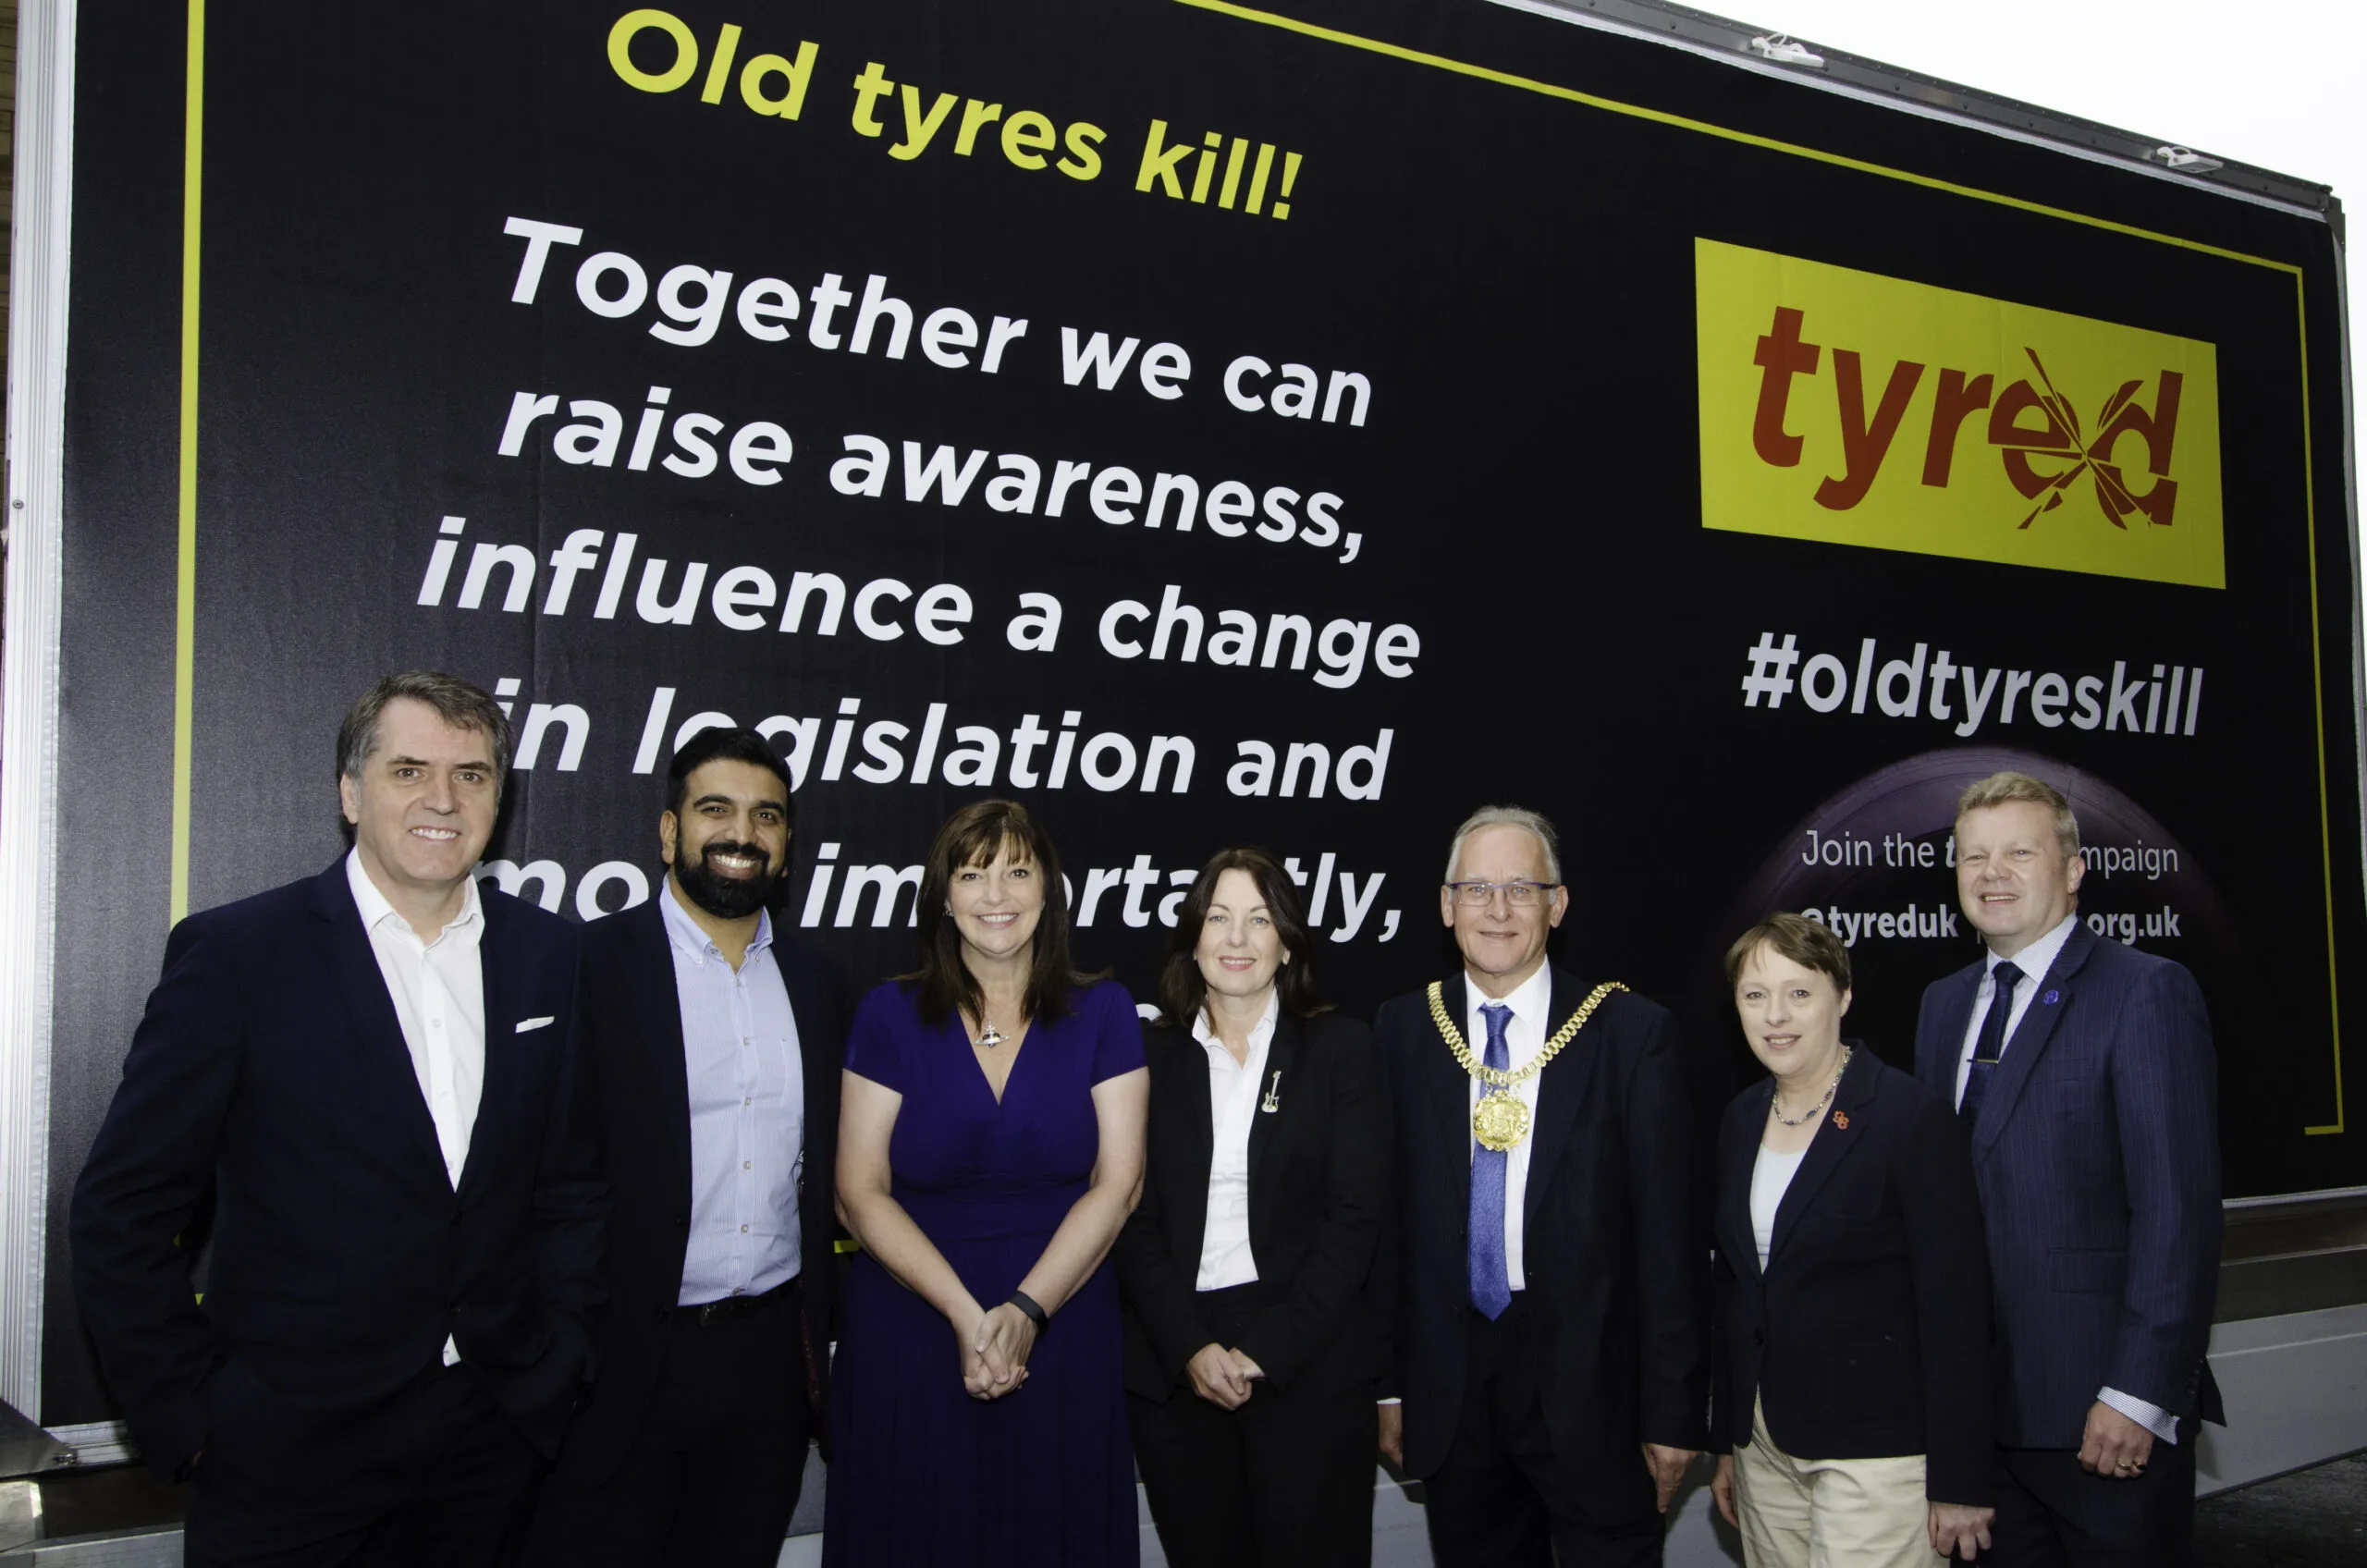 Tyred Campaign in Liverpool